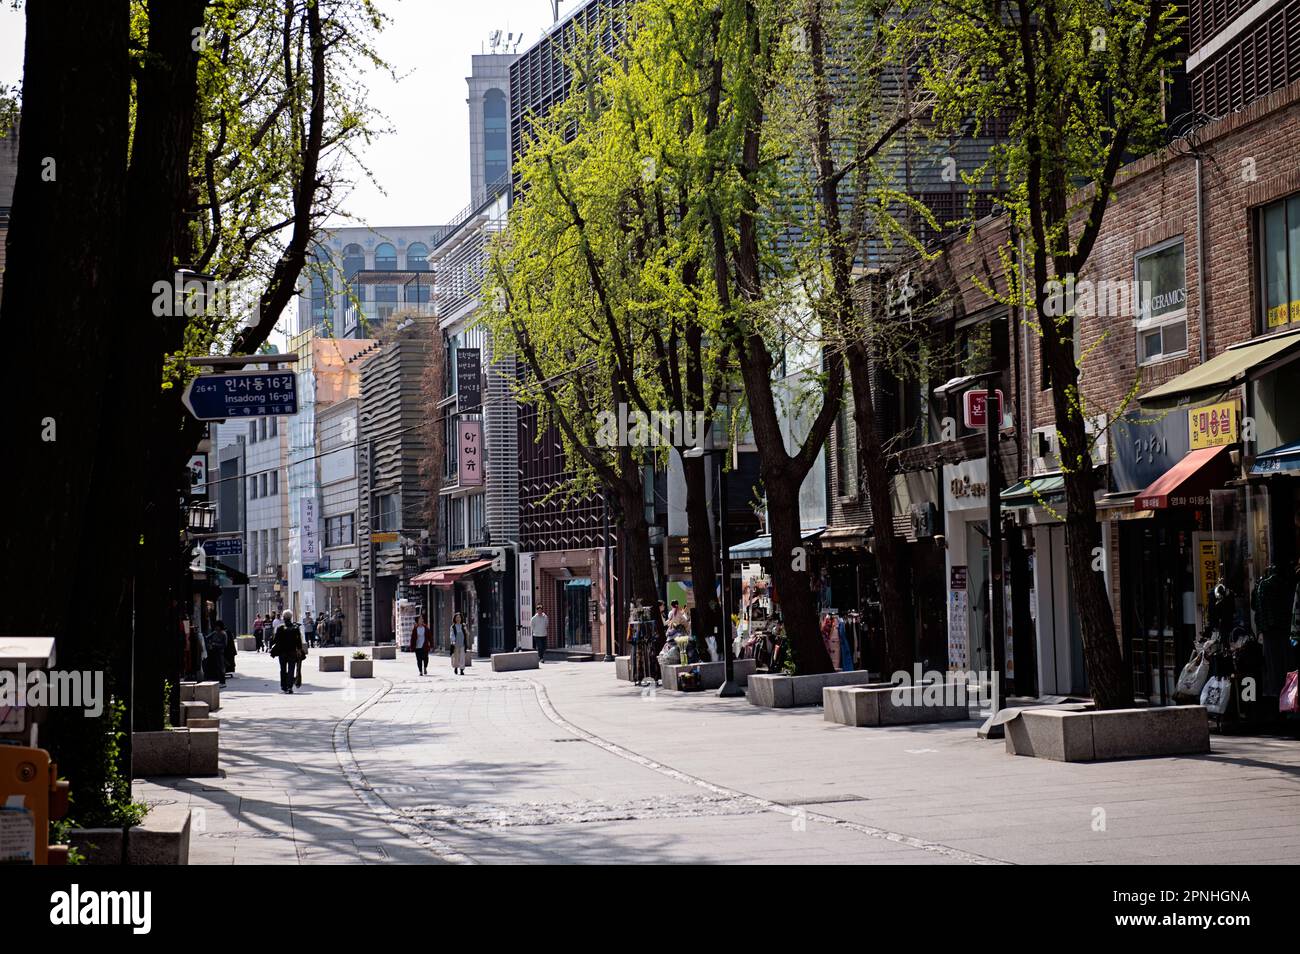 View of street in Insadong, Seoul, South Korea Stock Photo